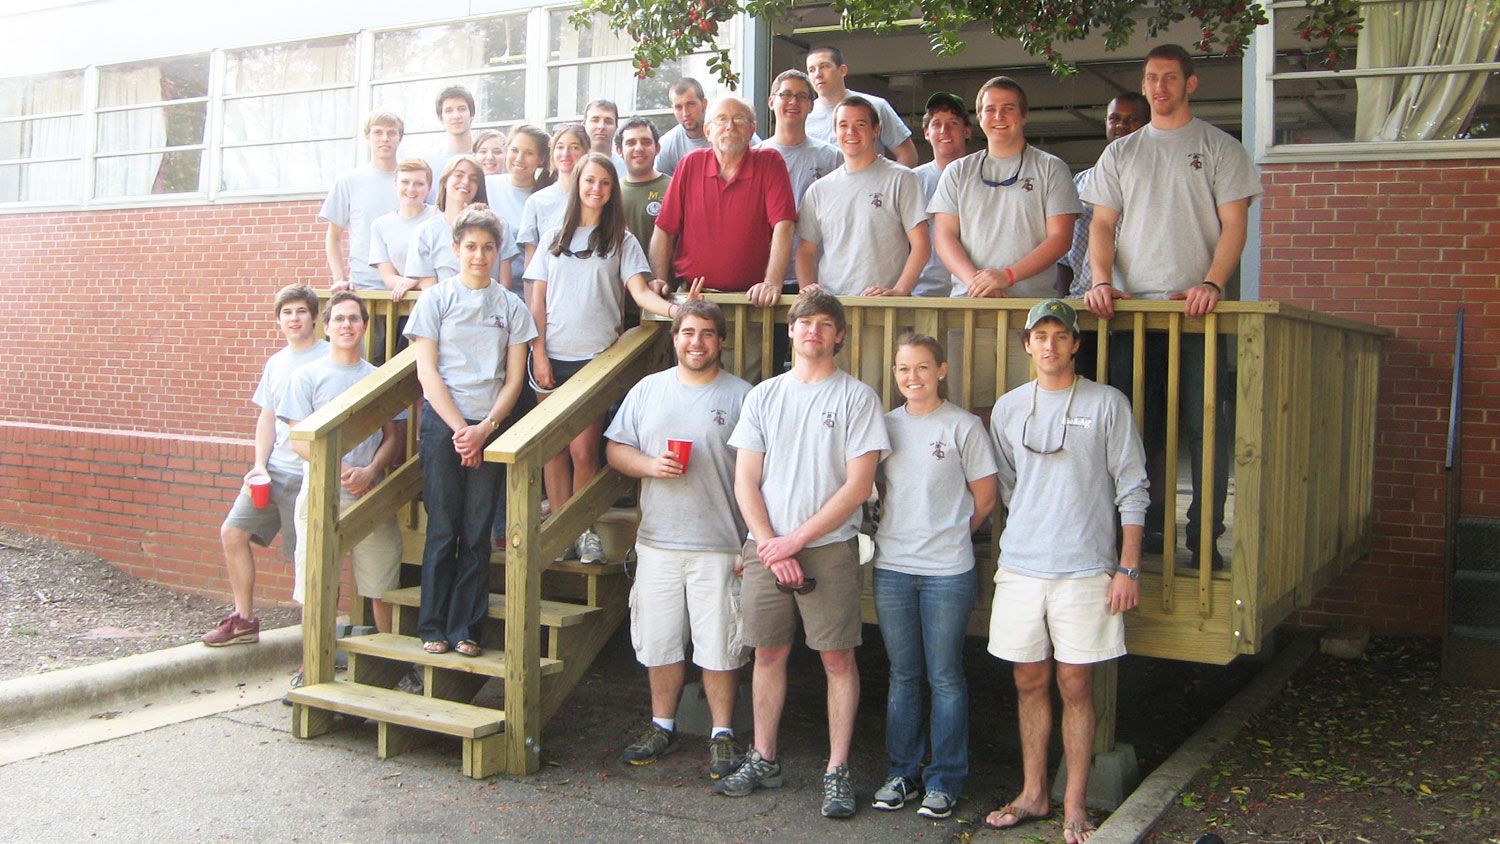 Students and their professor stand on an outdoor deck